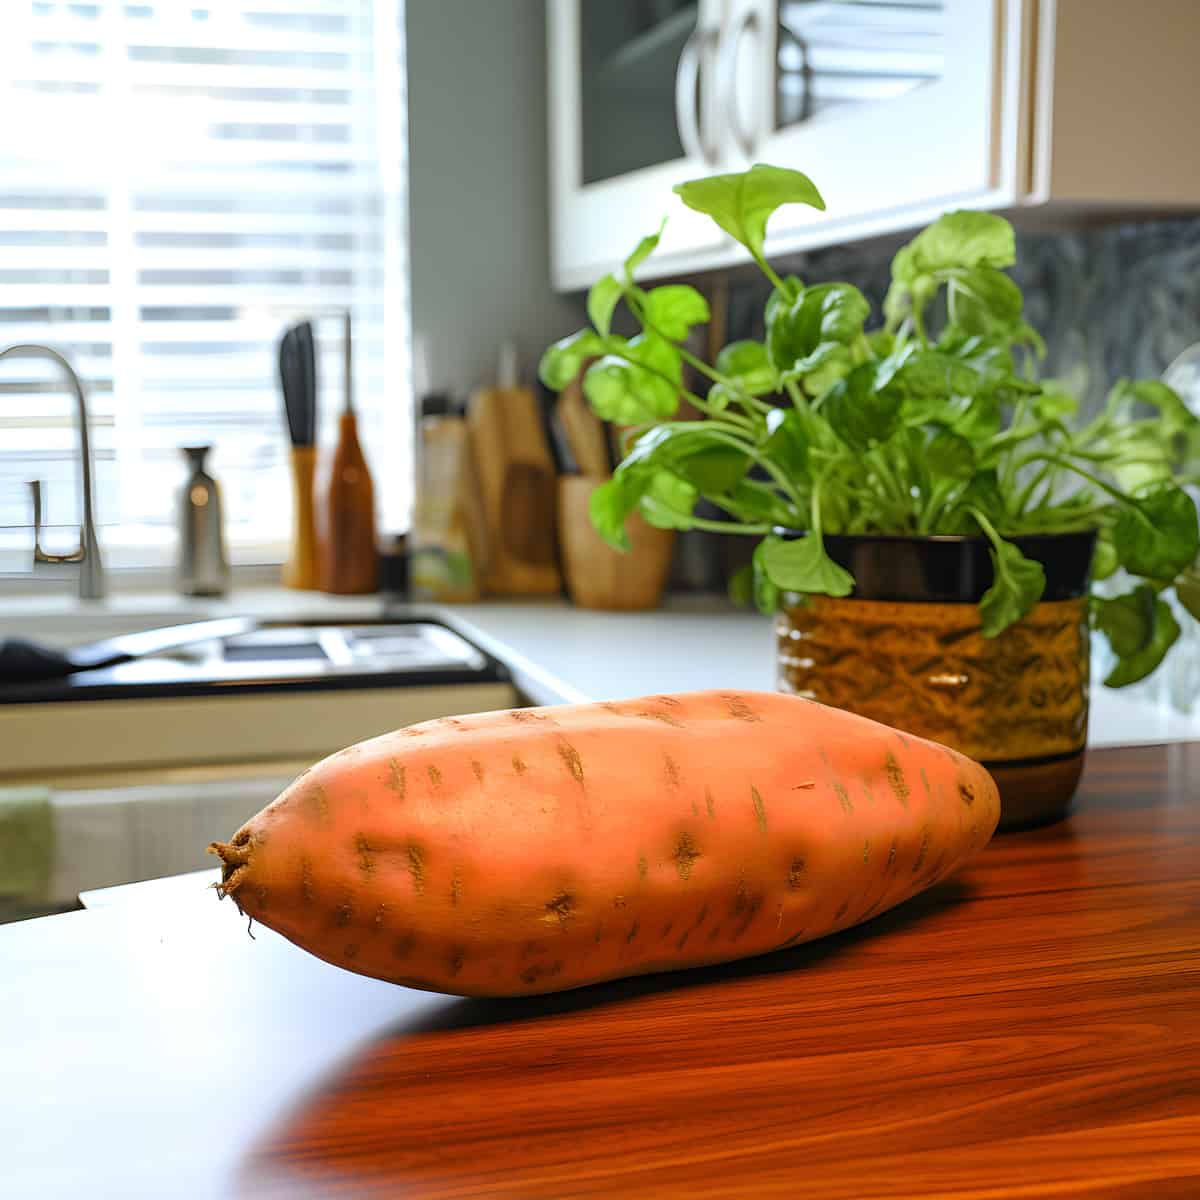 Upr Number Sweet Potatoes on a kitchen counter